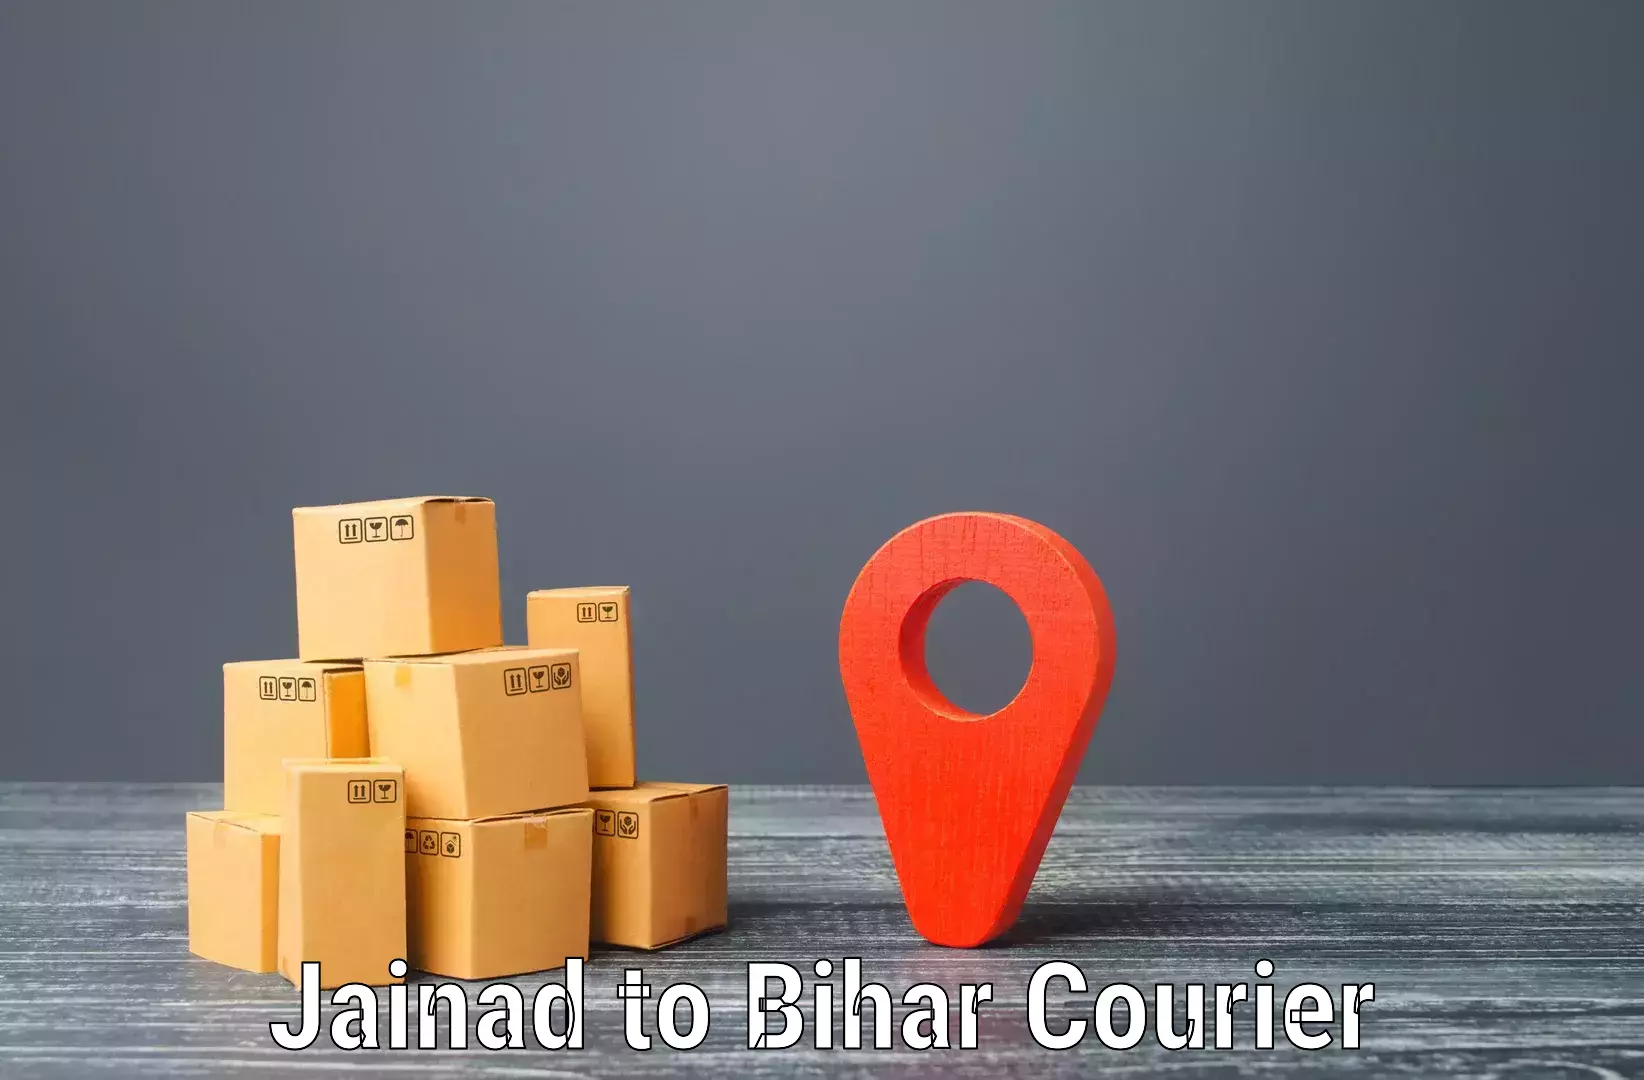 Express delivery capabilities Jainad to Mohammadpur